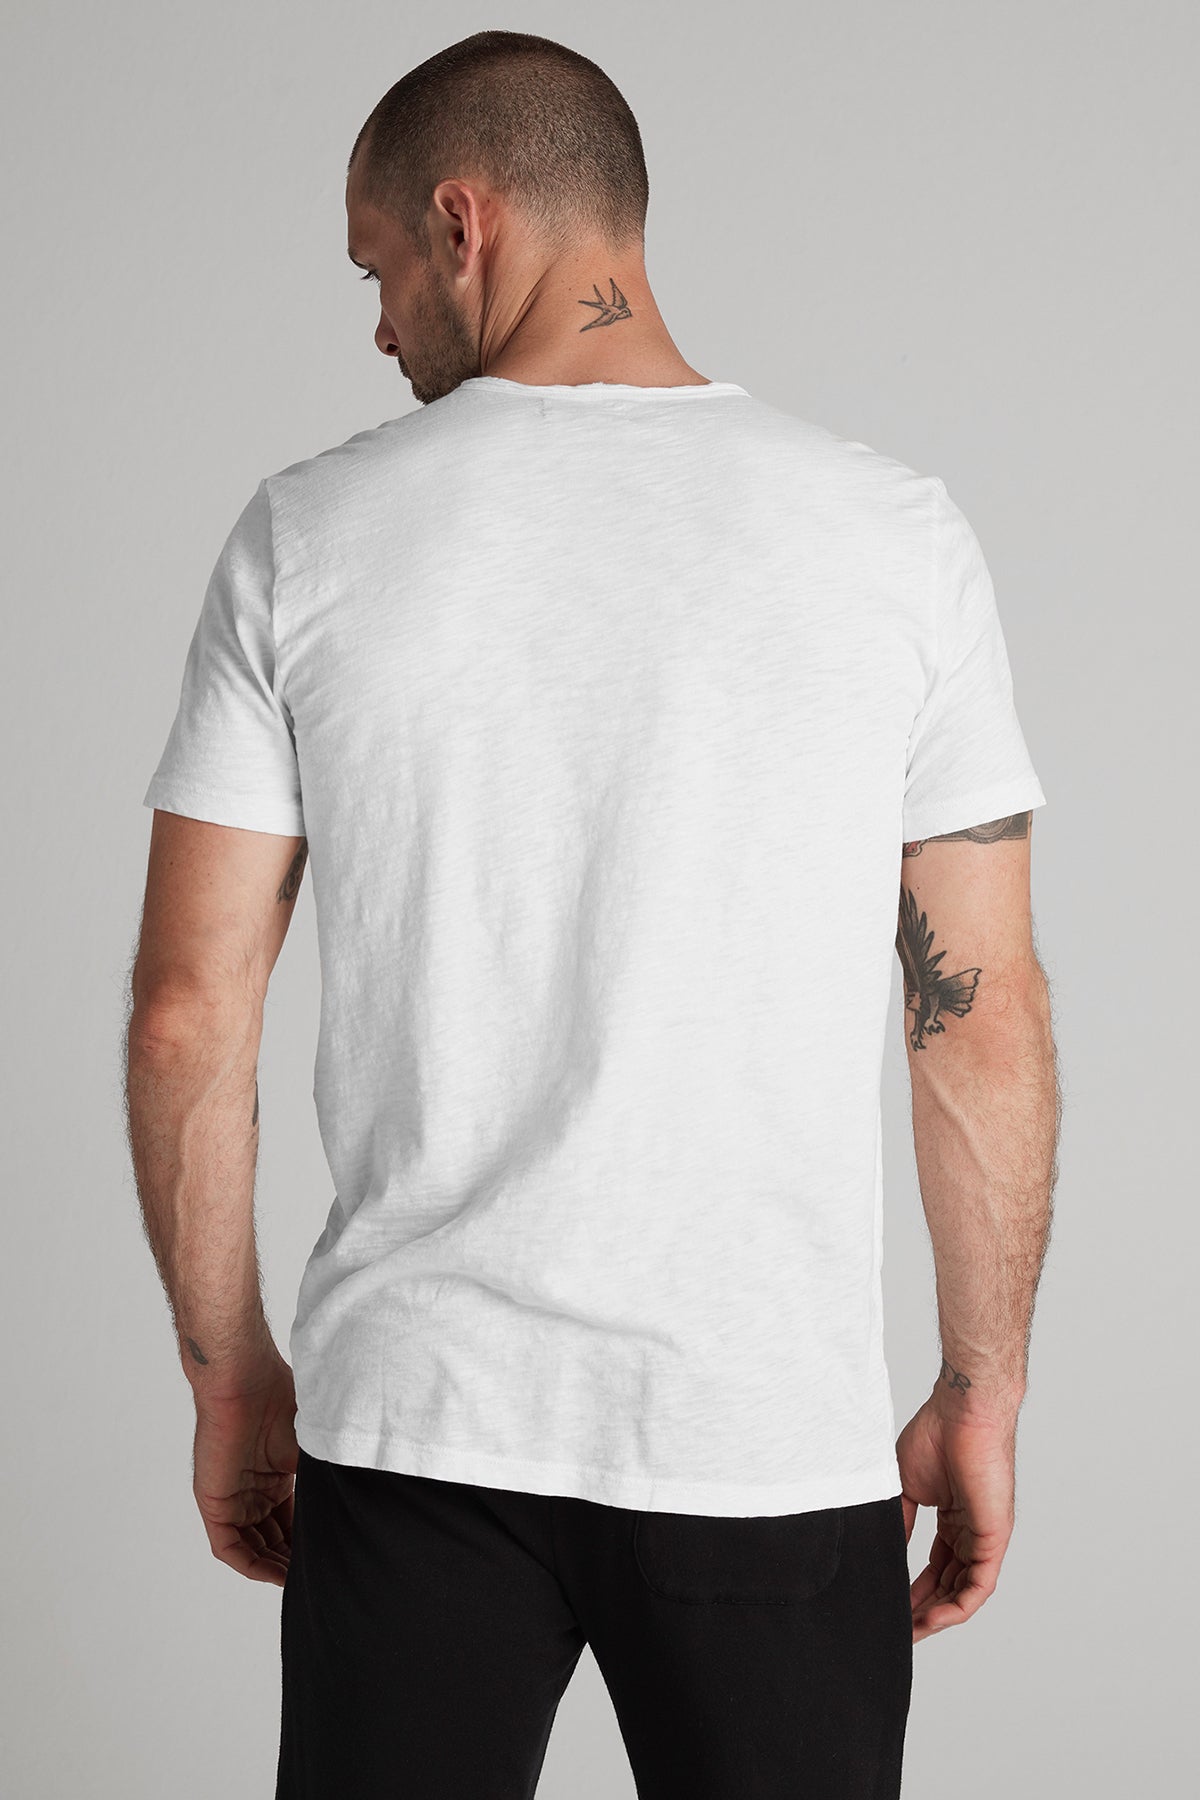   Man in a Velvet by Graham & Spencer CHAD TEE white t-shirt and black pants, viewed from behind, showing tattoos on both upper arms. 